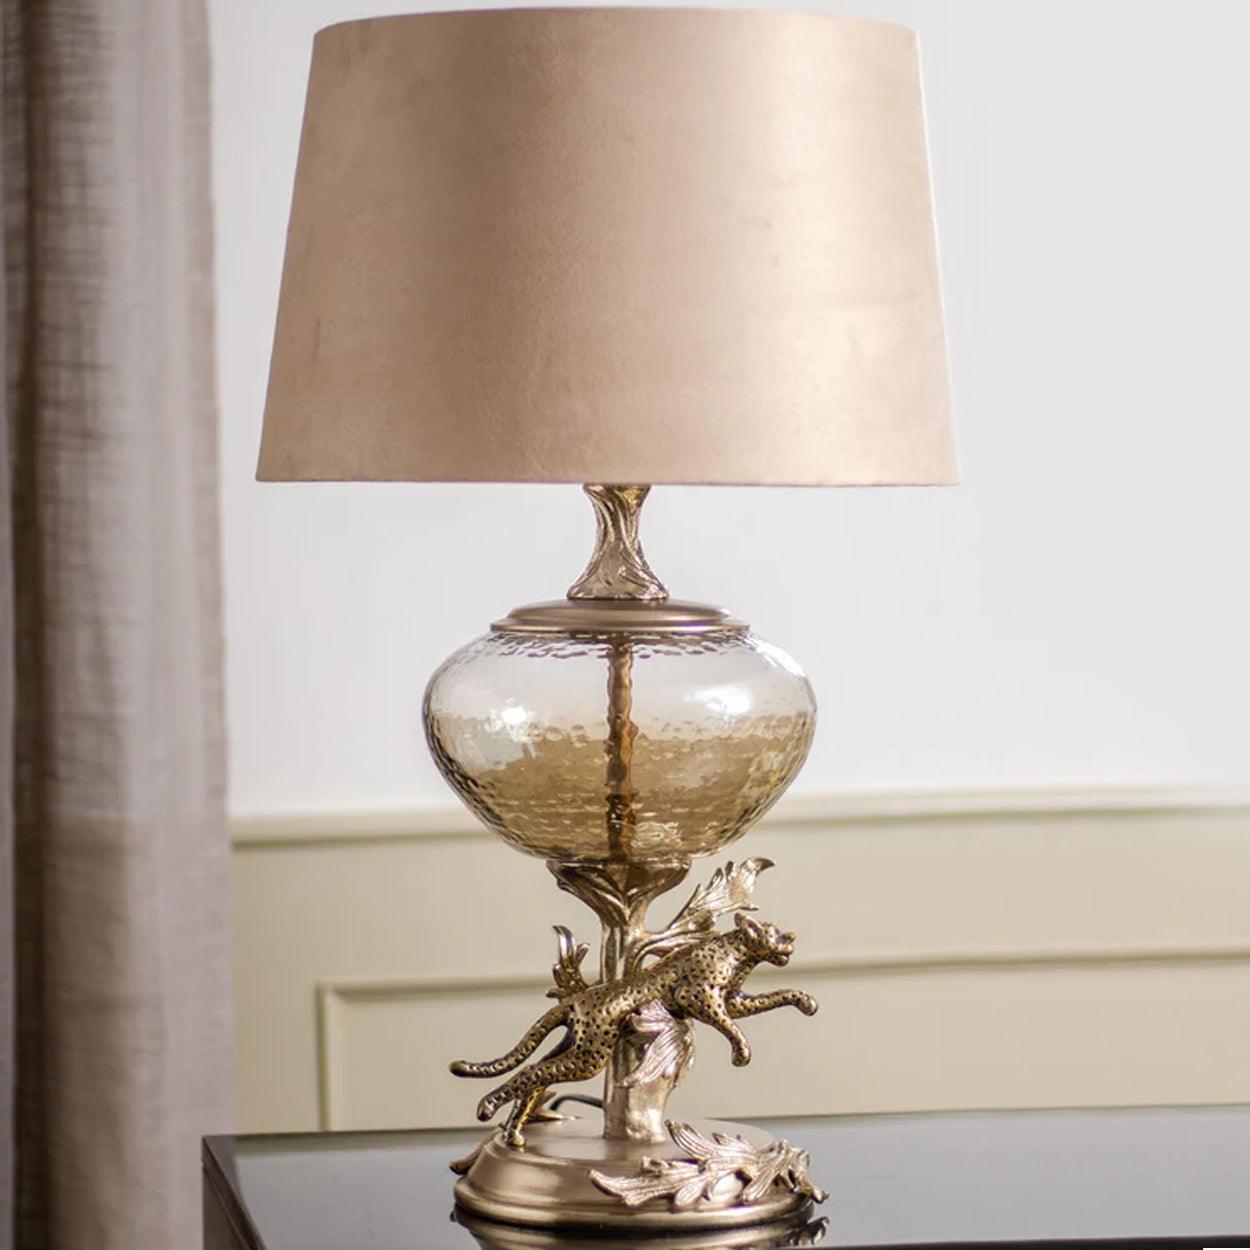 RUNNING LEOPARD HAND MADE METAL AND GLASS TABLE LAMP - Ankur Lighting